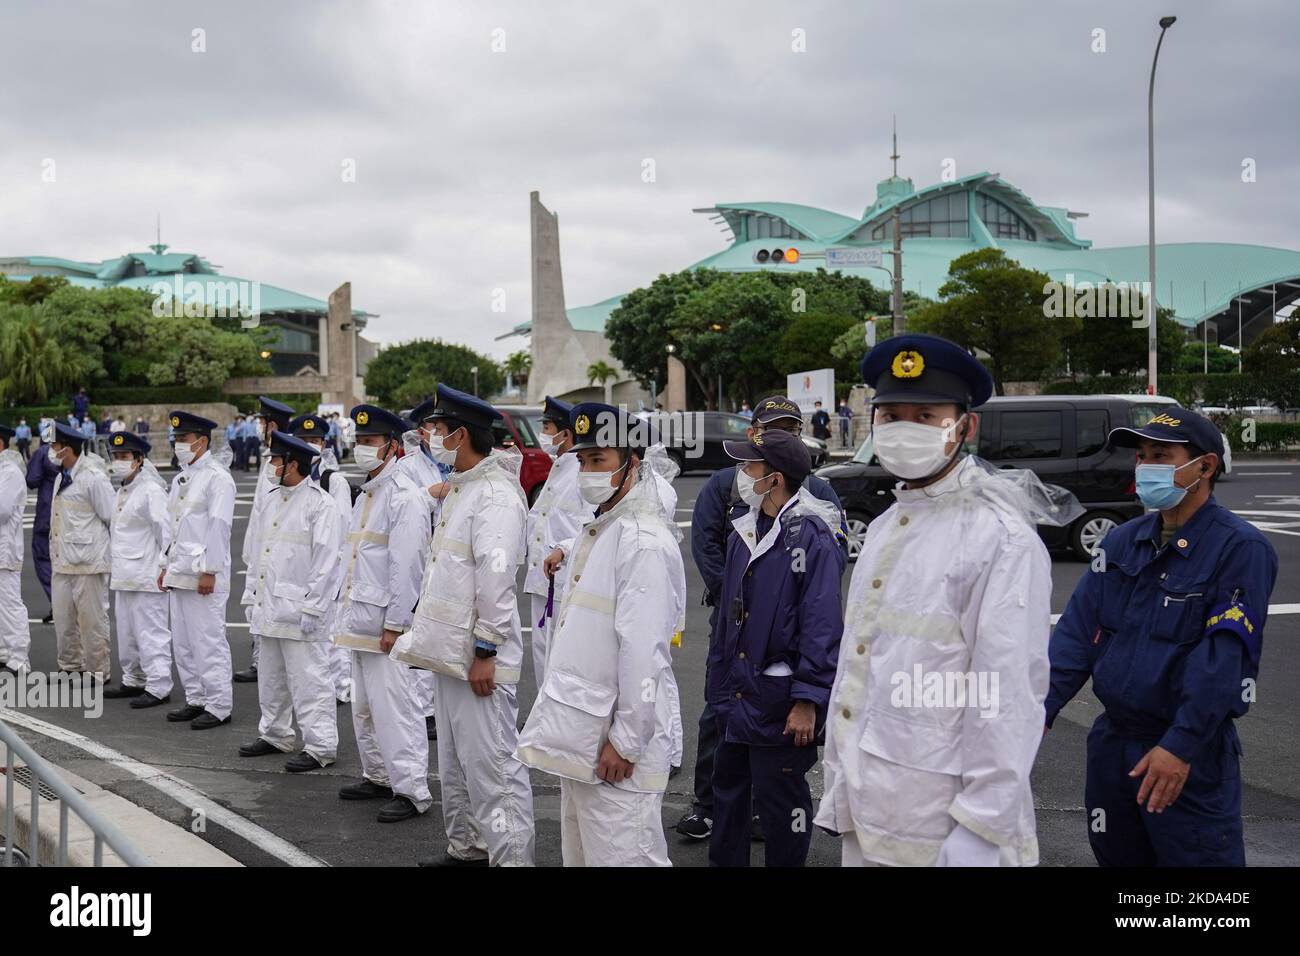 Police officers stands around Okinawa Convention Center as Okinawa Reversion 50th Anniversary Ceremony is held in Ginowan, celebrating Okinawa’s return to Japanese governance in 1972 from postwar US control, on May 15, 2022 in Okinawa, Japan. (Photo by Jinhee Lee/NurPhoto) Stock Photo